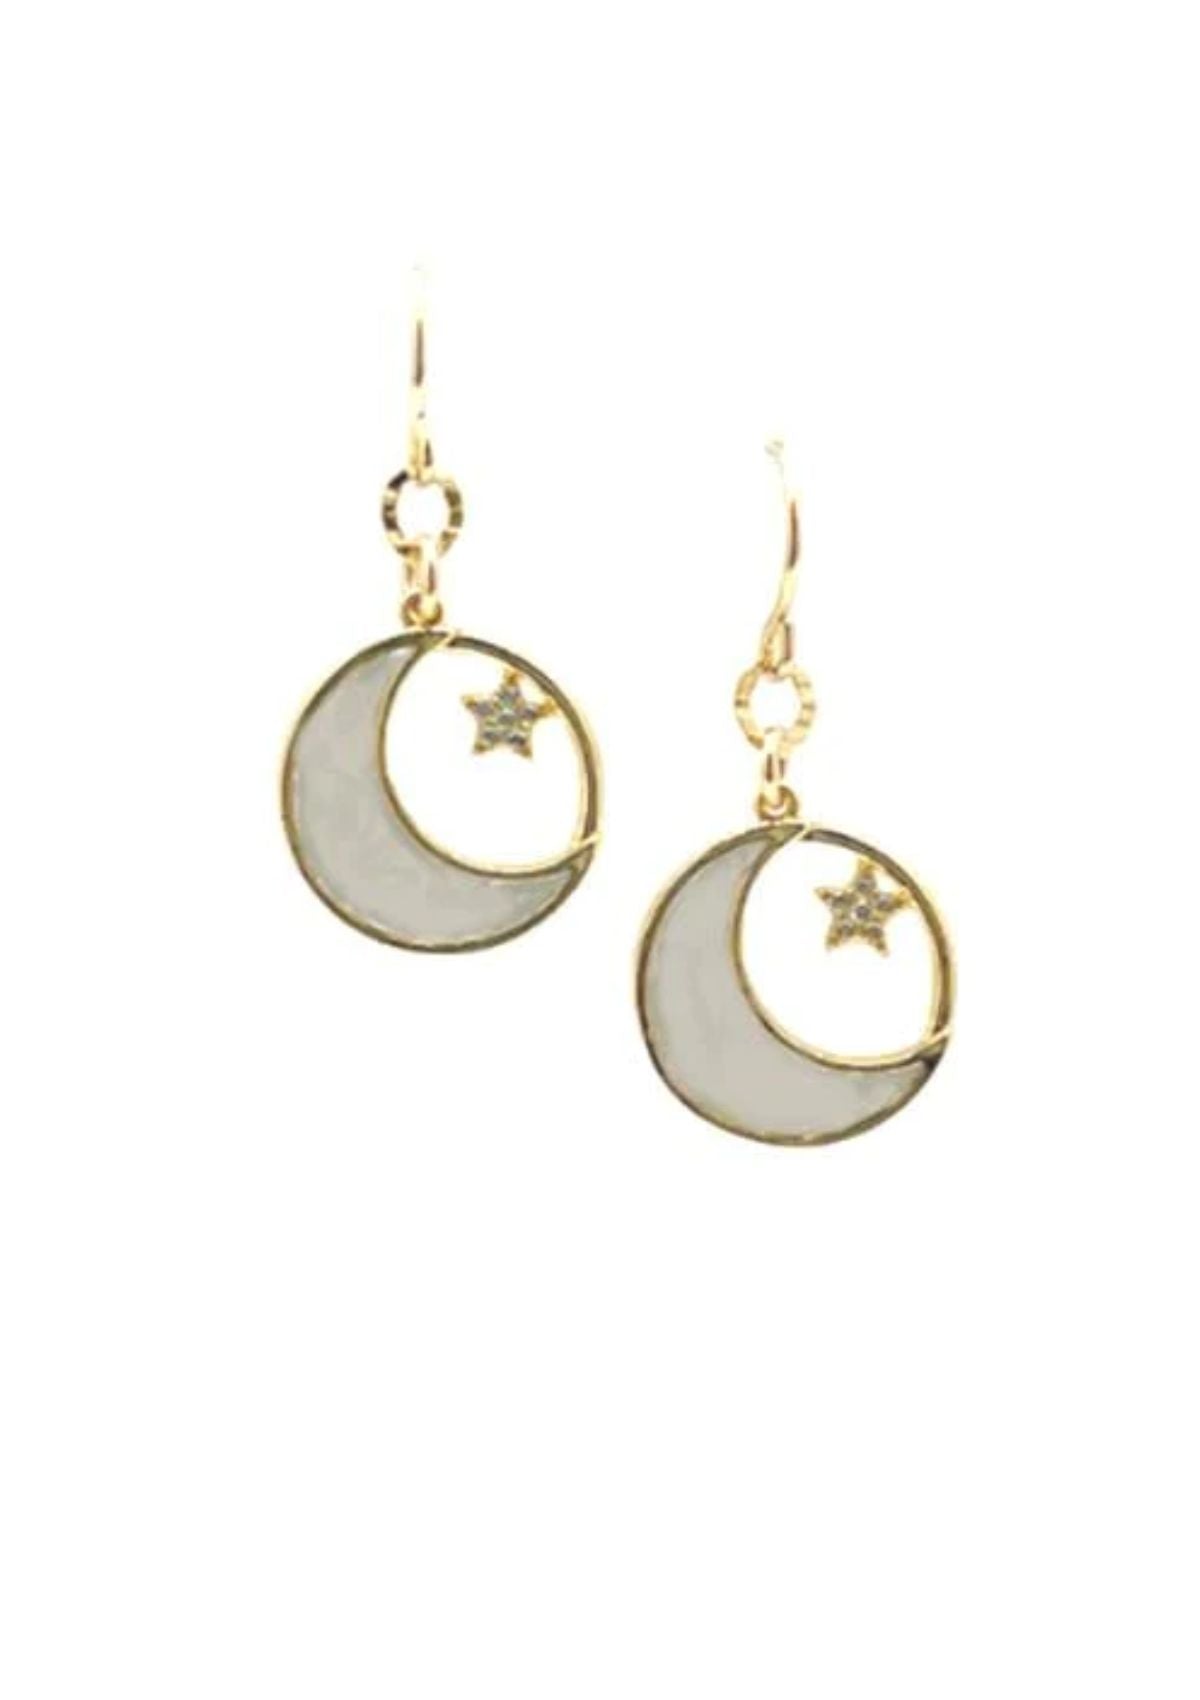 Round Moon Star Mother of Pearl Earrings on 14K Gold-Filled Wire